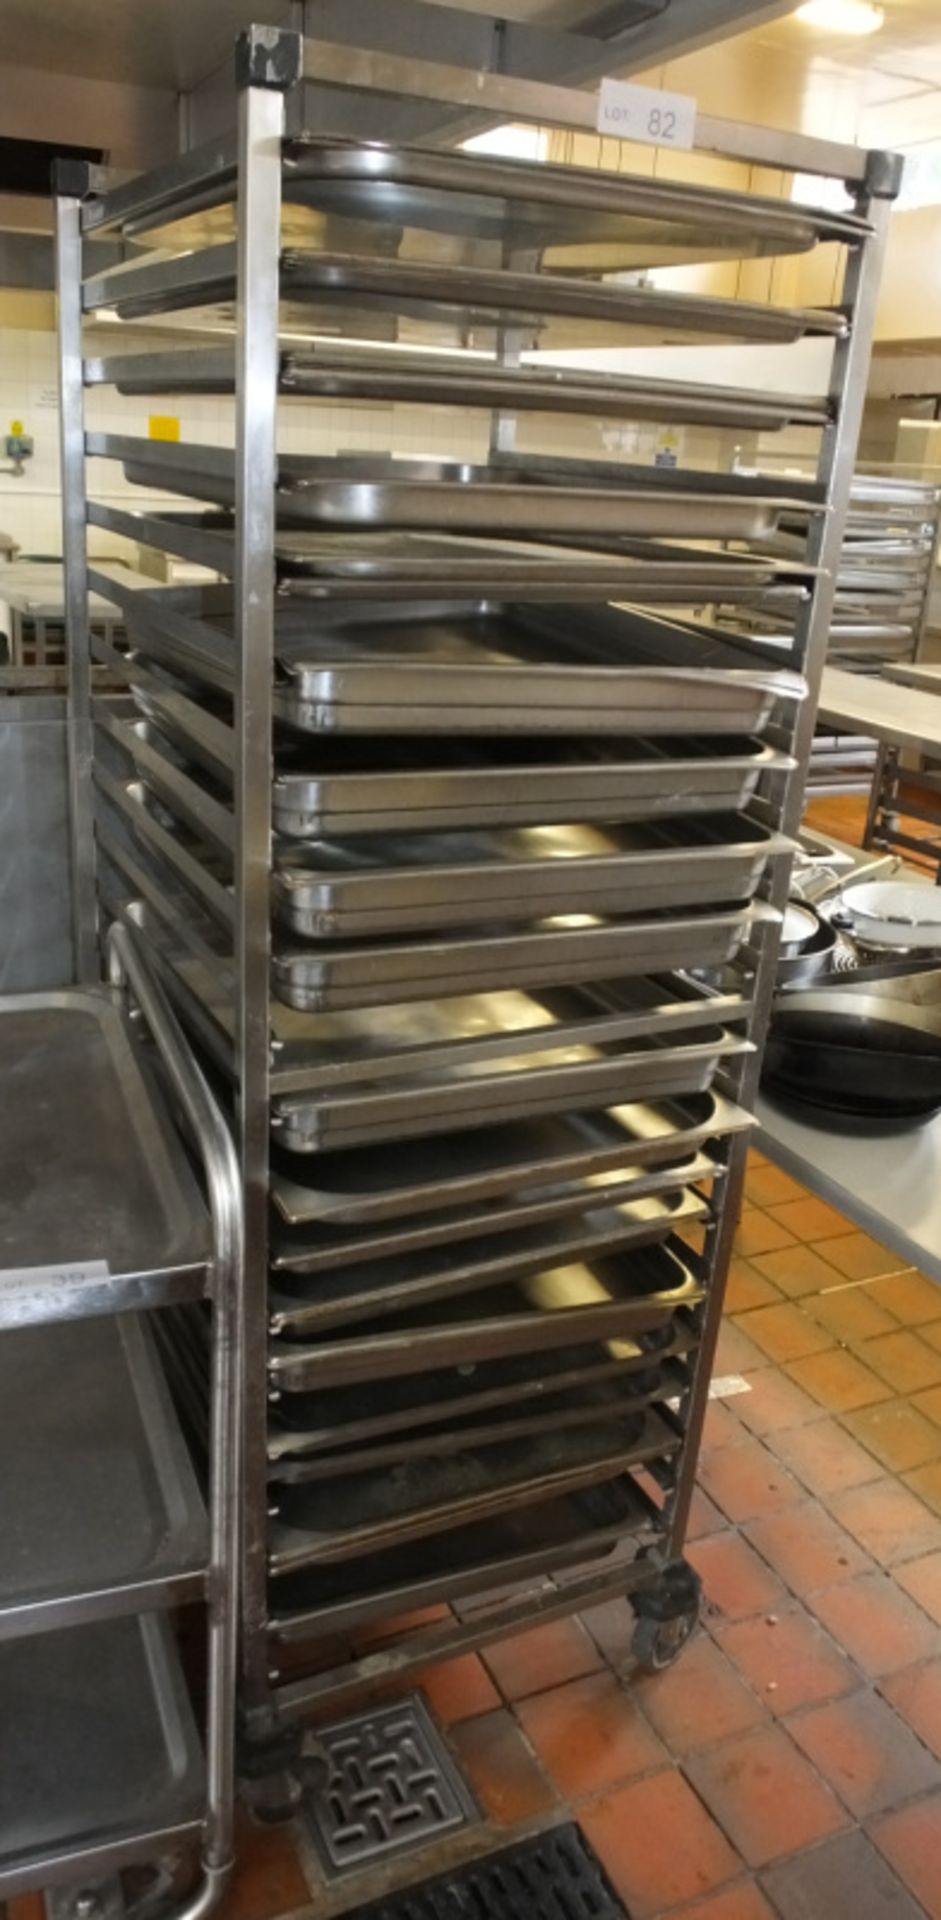 Cidelcem Cidelroll Stainless Steel Tray Rack Trolley - L590 x D690 x H1770mm